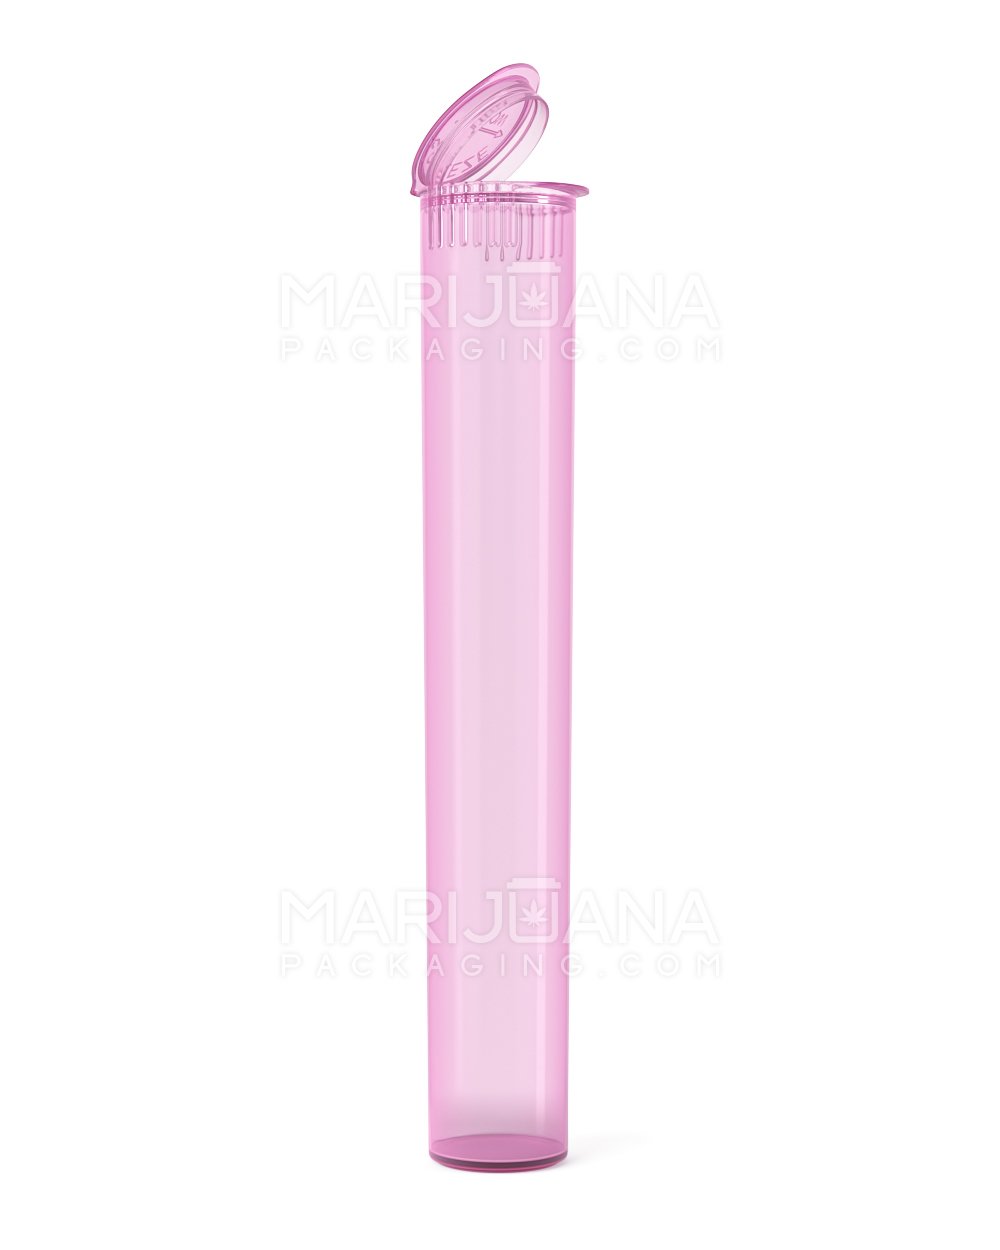 Child Resistant | King Size Pop Top Translucent Plastic Pre-Roll Tubes | 116mm - Pink - 1000 Count - 1